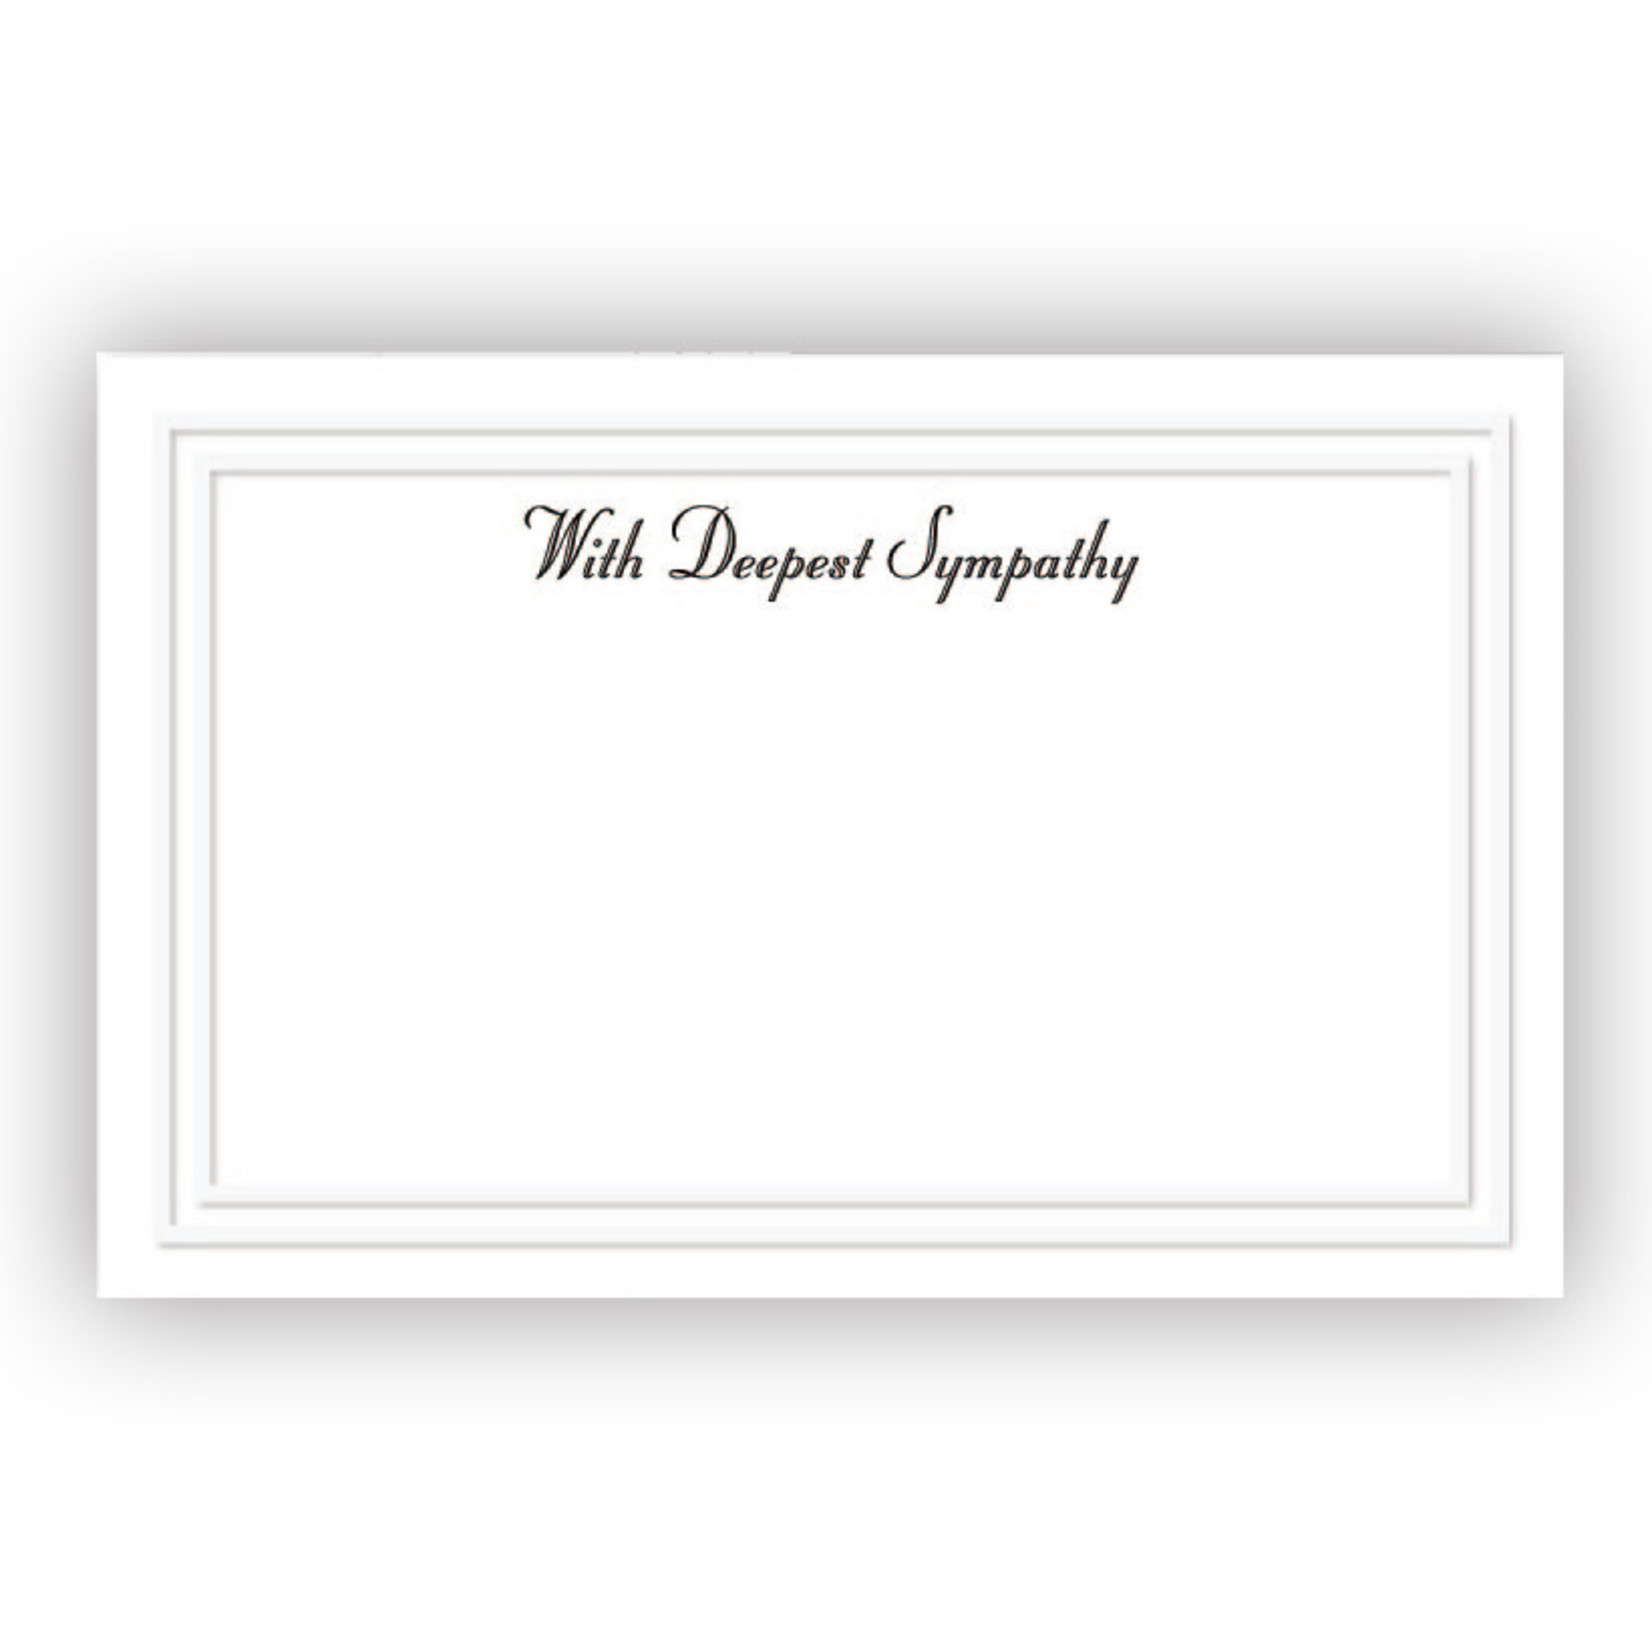 “WITH DEEPEST SYMPATHY” FRONT IMPRINT PLAIN BACK 3 1/2″ x 2 1/4″